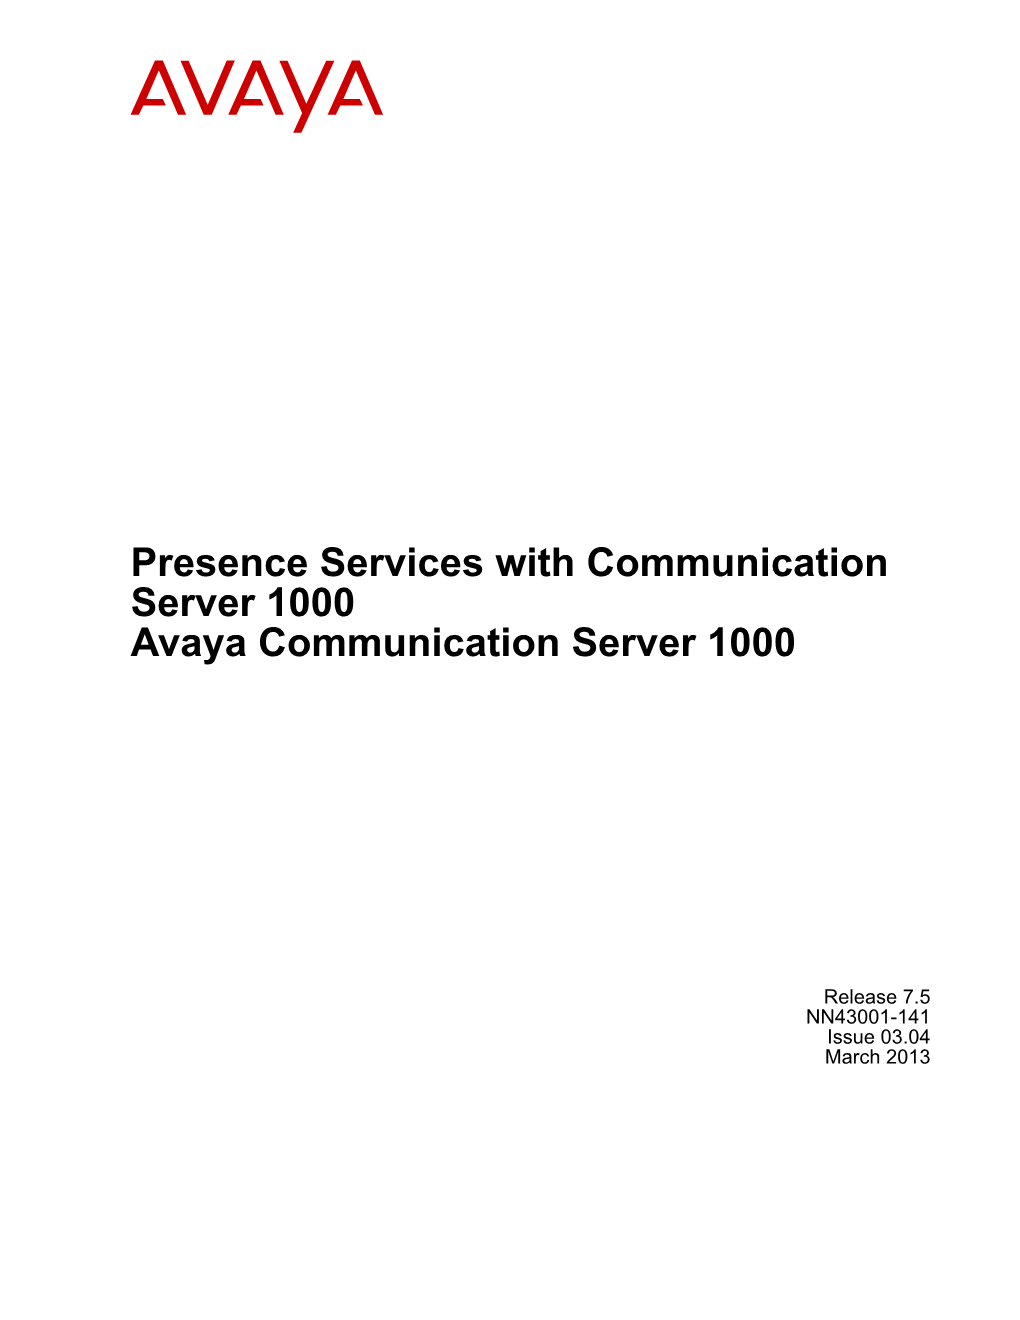 Presence Services with Communication Server 1000 Avaya Communication Server 1000